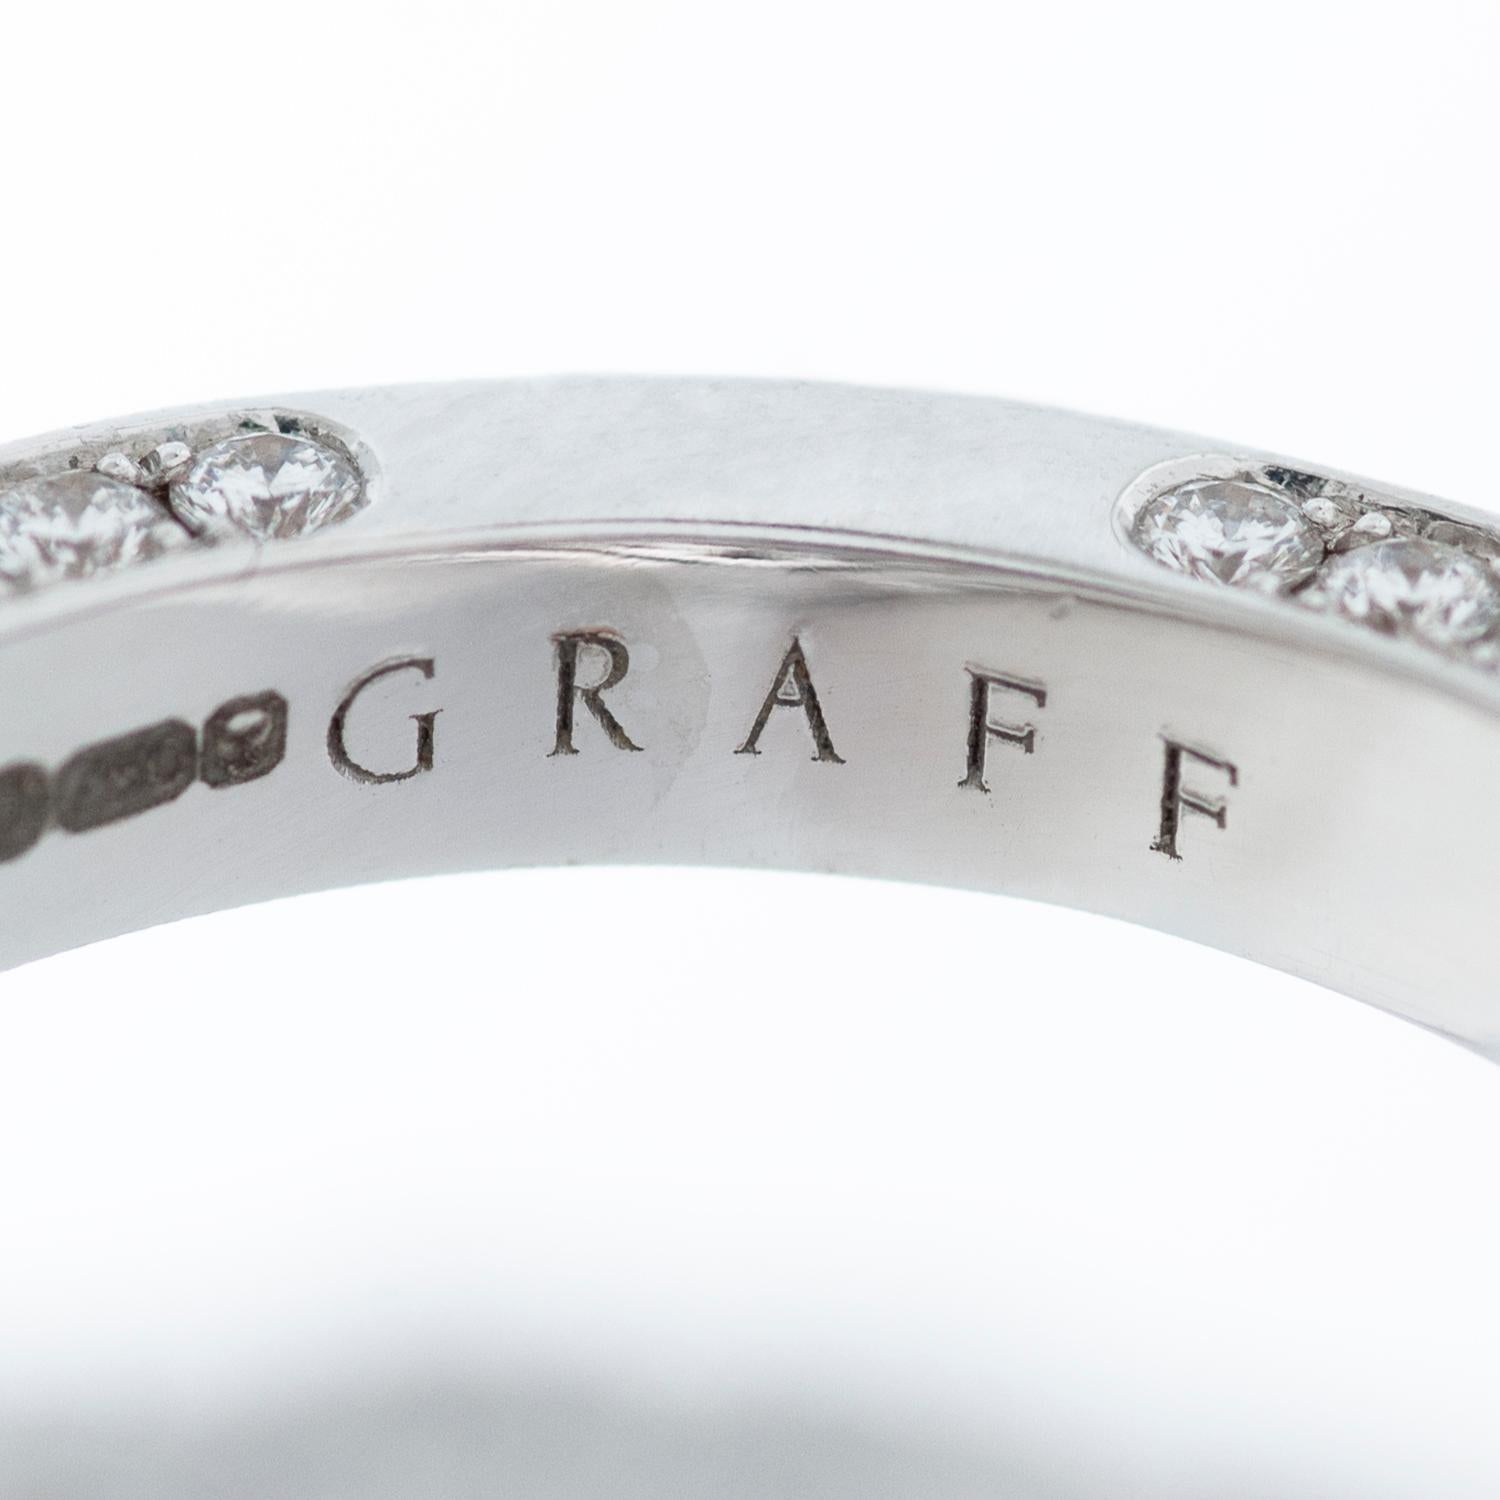 Graff Pave Diamond Bombe Ring in 18kwg with 1.00ct G/VVS2 Round Diamond Center In Excellent Condition For Sale In Philadelphia, PA